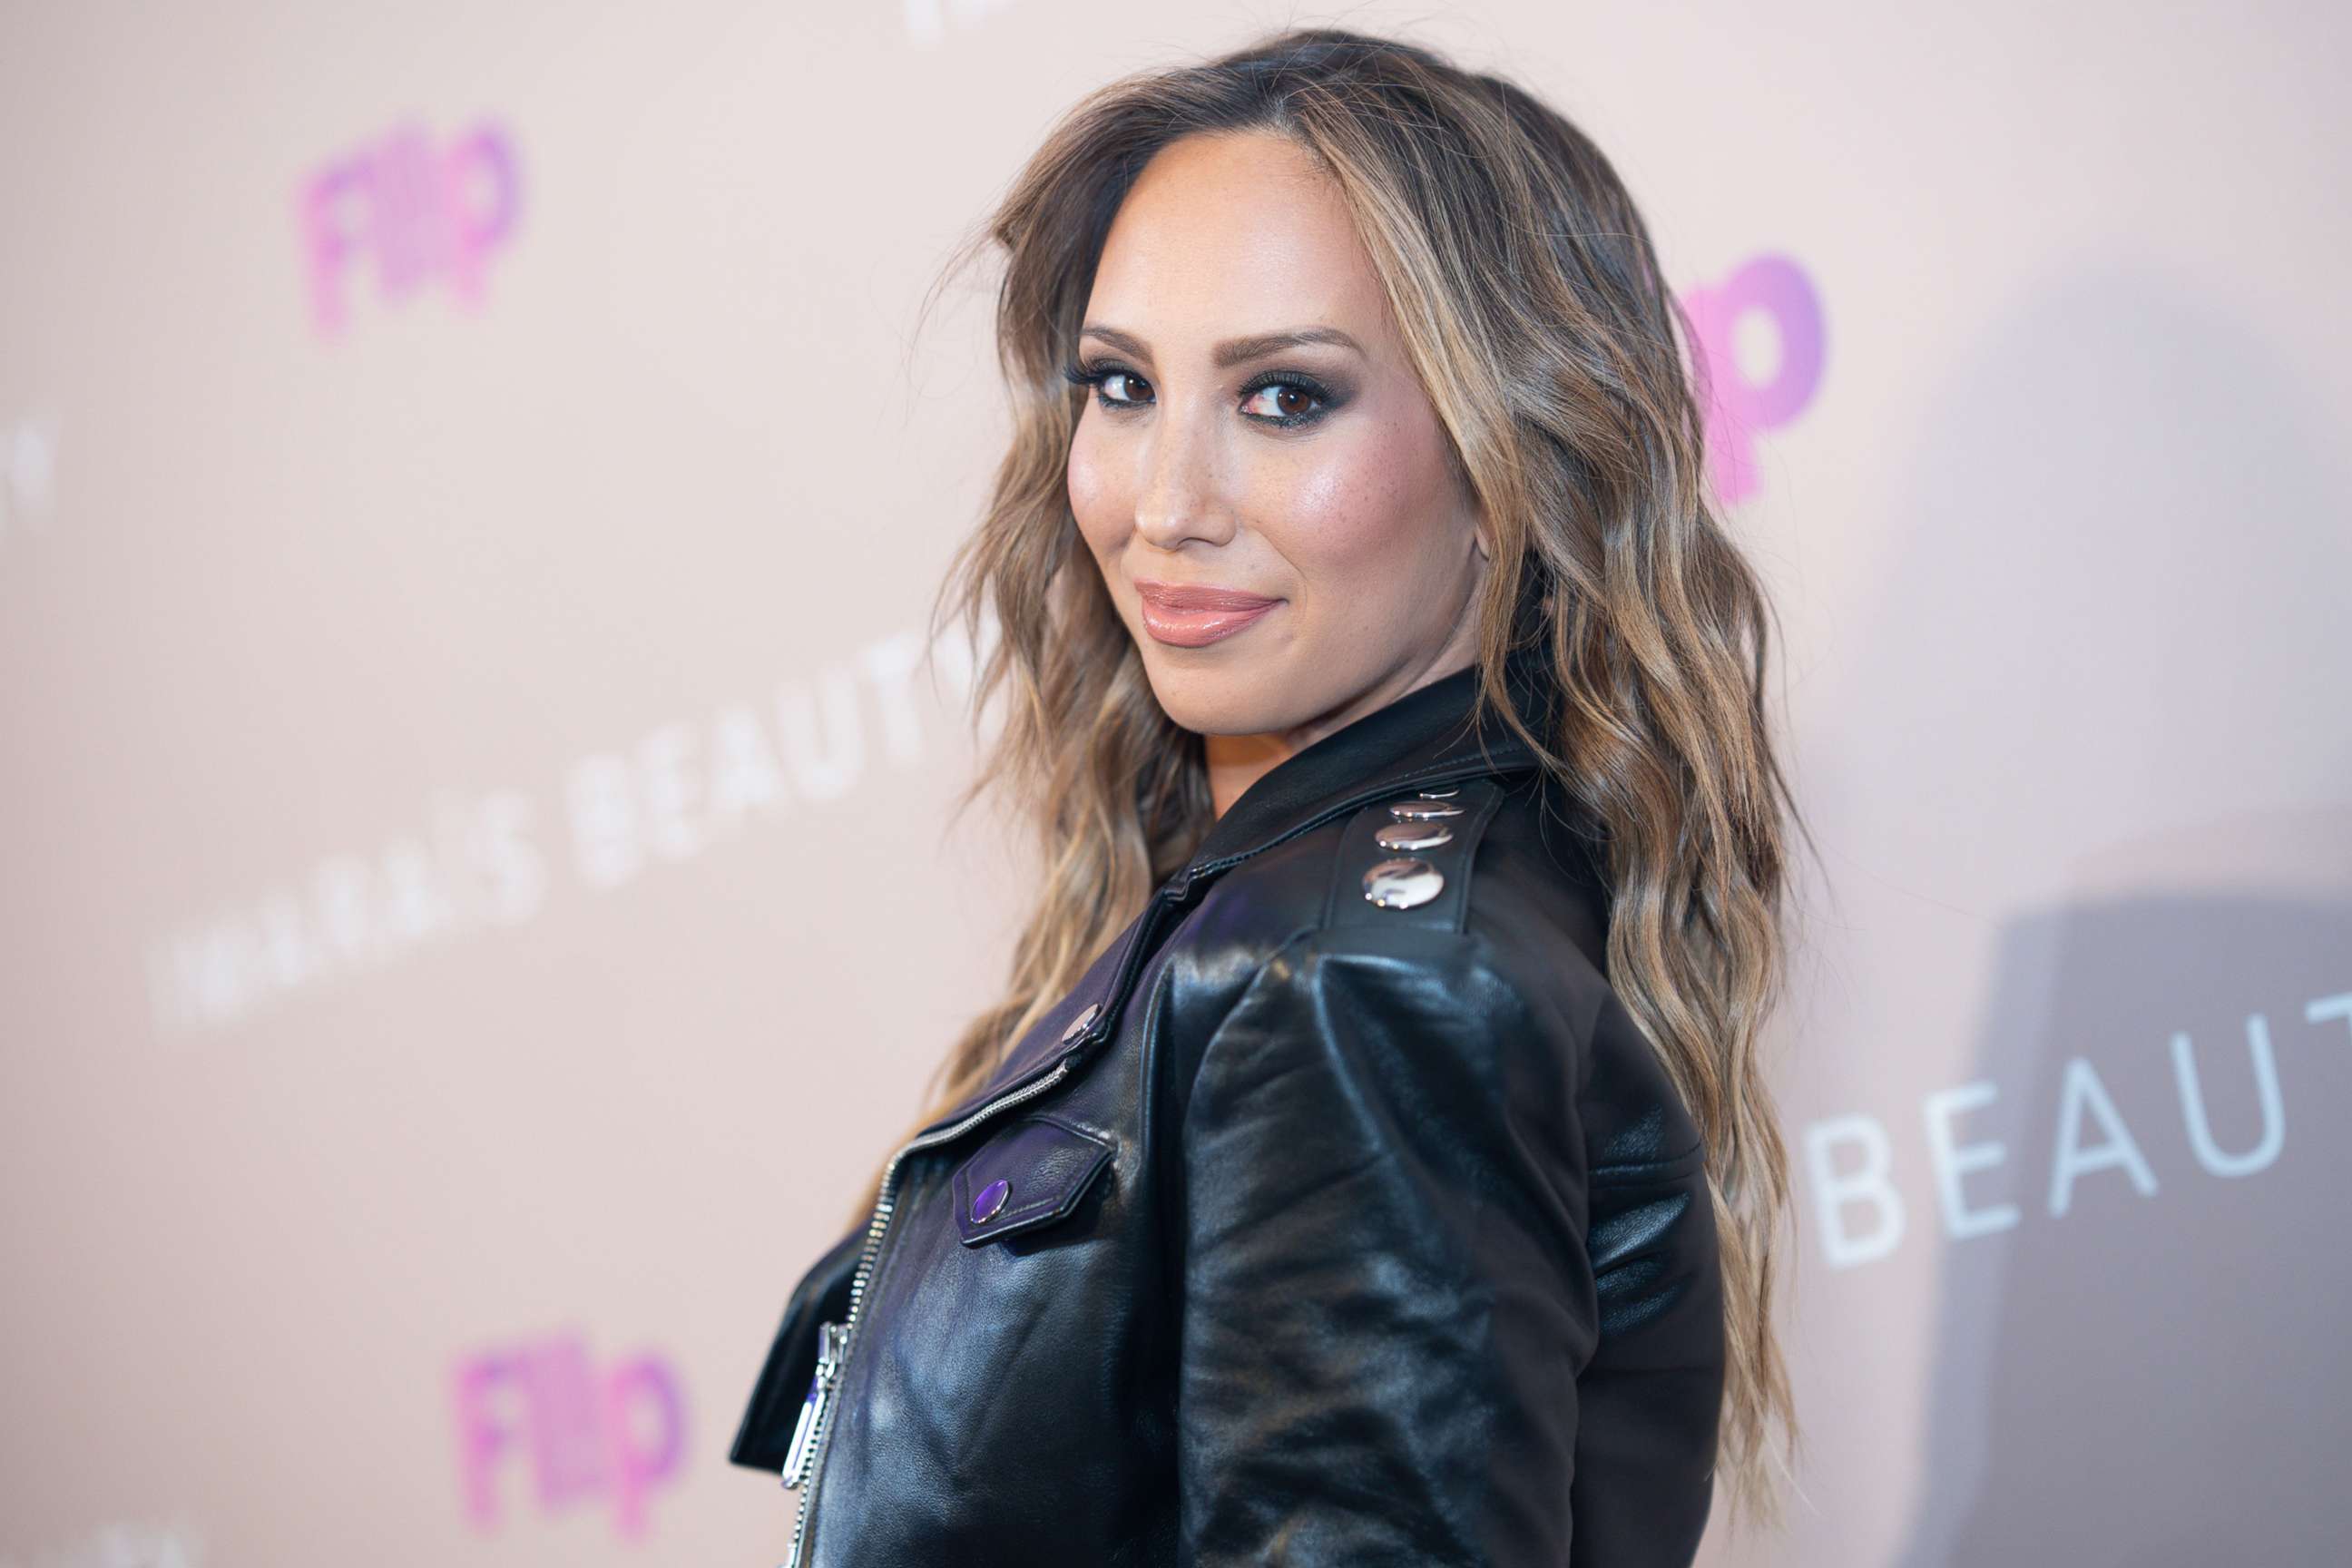 PHOTO: Cheryl Burke attends a Beauty Partnership Launch Party, Nov. 03, 2022 in Los Angeles.